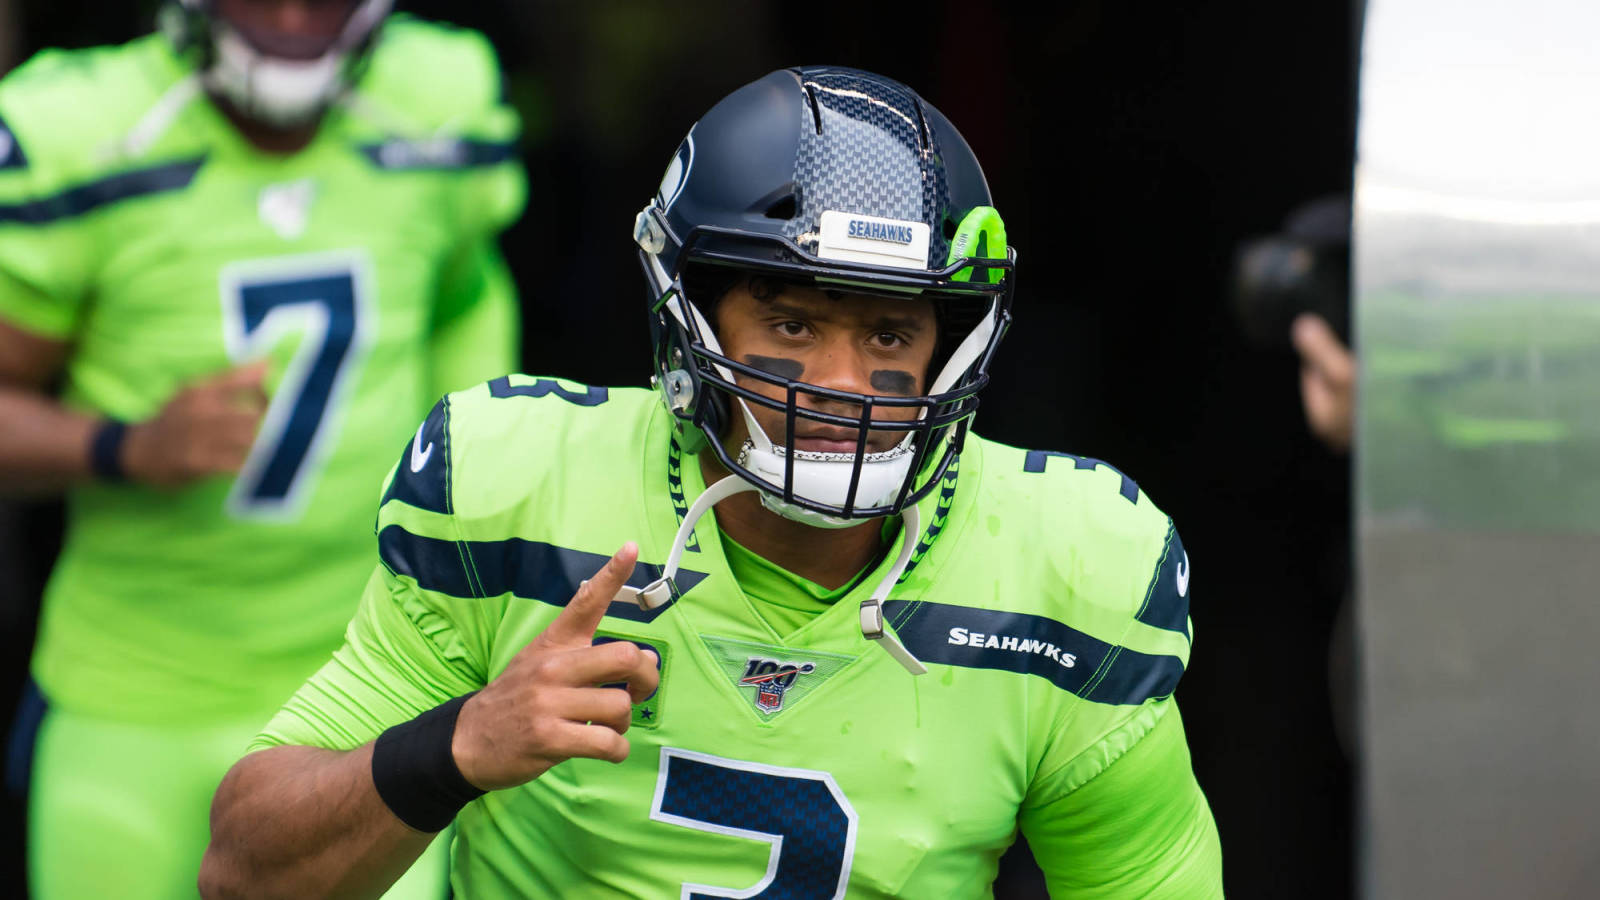 Seahawks blasted for ugly uniforms on 